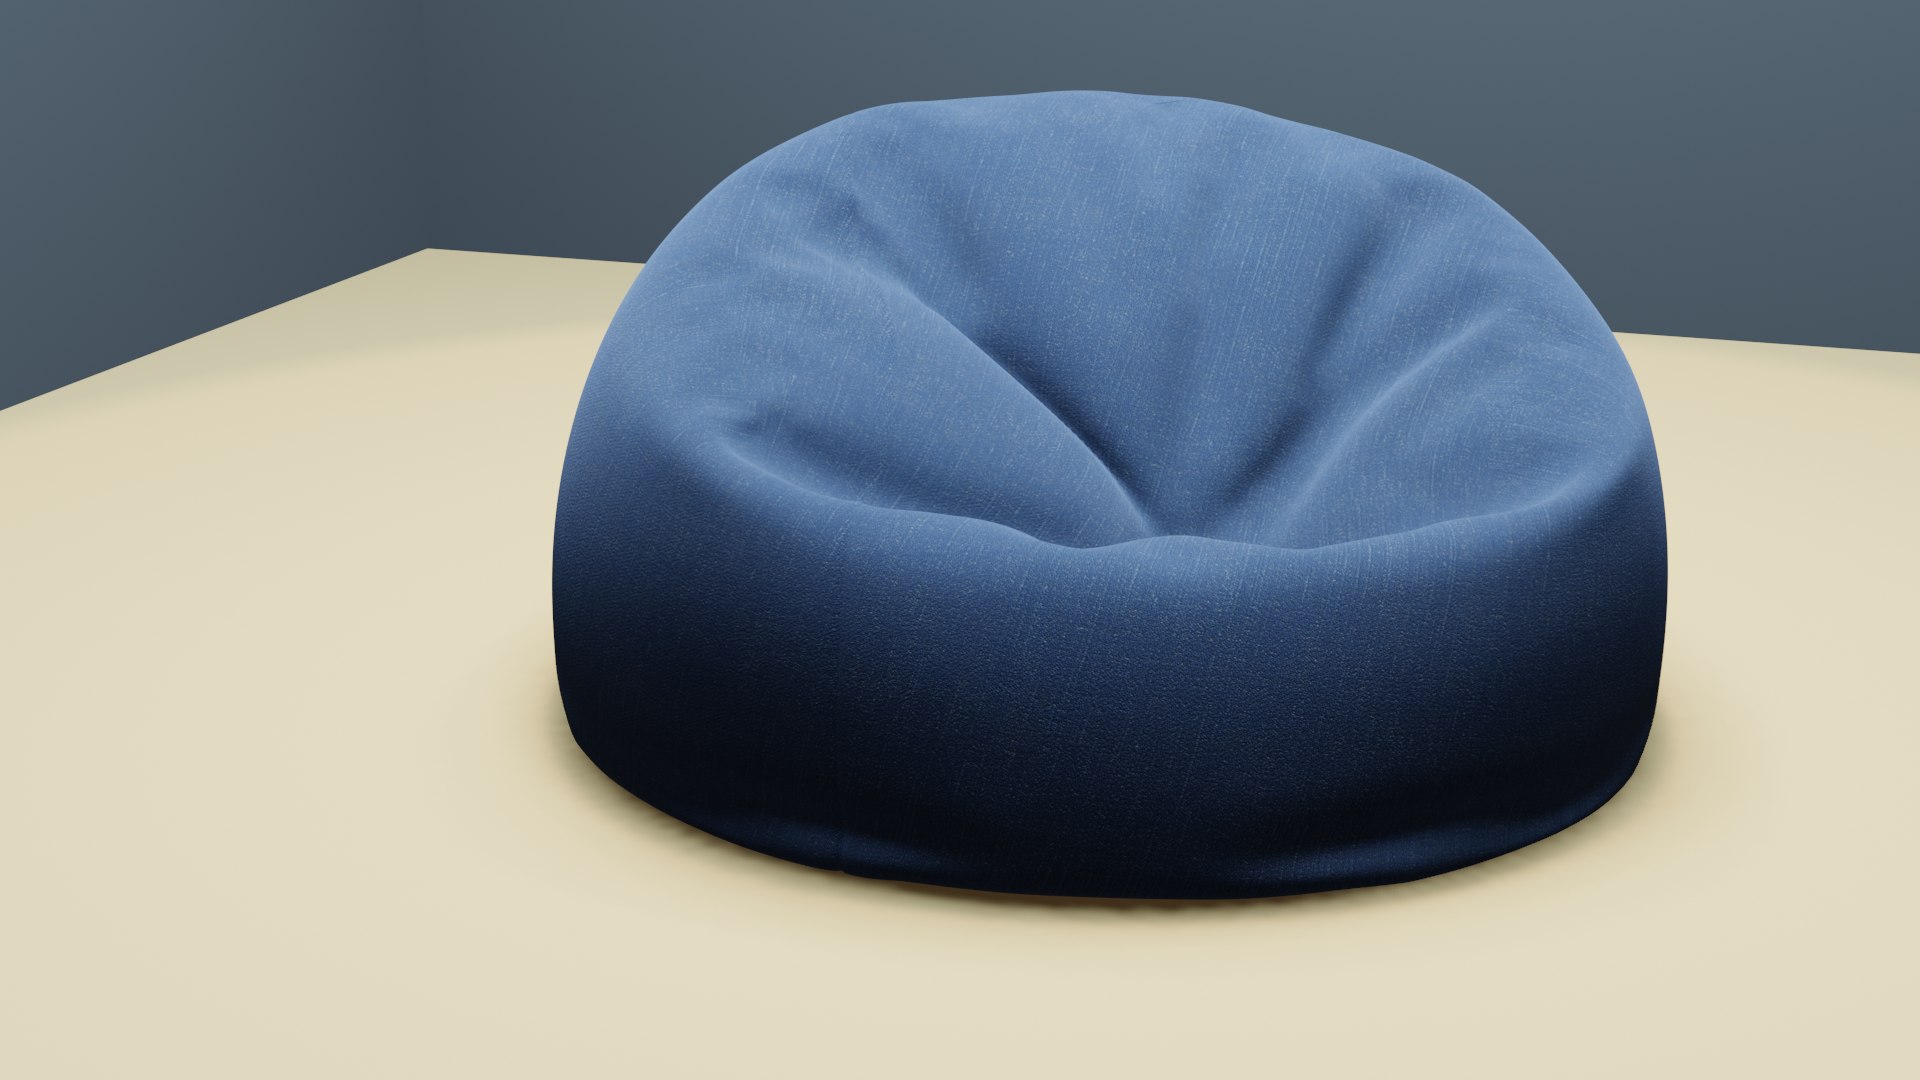 Custom bean bag chair our model Ugo. Made in Italy by Scndaletti